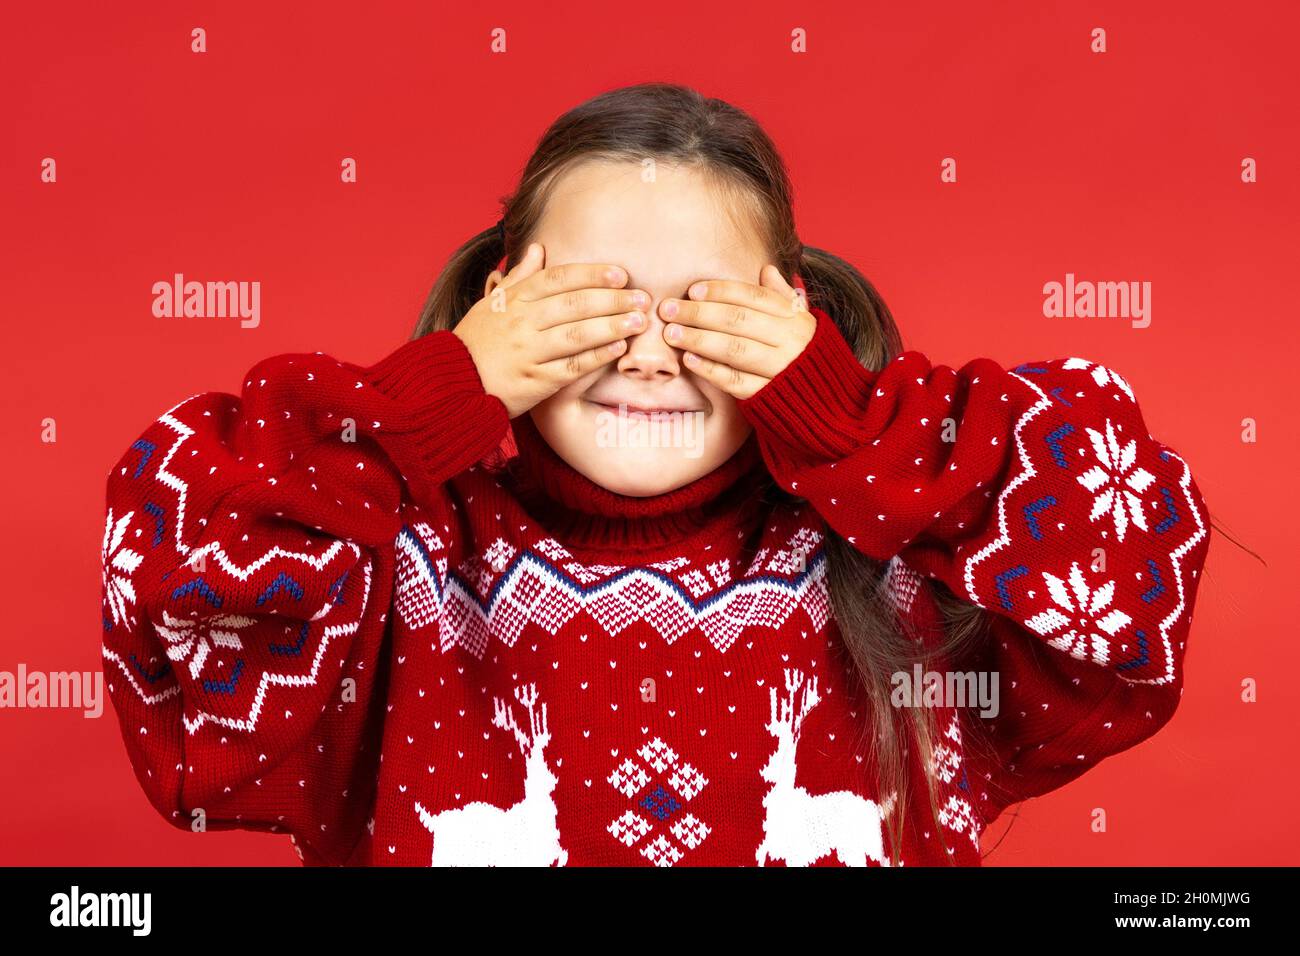 close-up portrait of smiling, charming girl in red Christmas sweater with reindeer covering her eyes with hands and waiting for gift, isolated on red Stock Photo